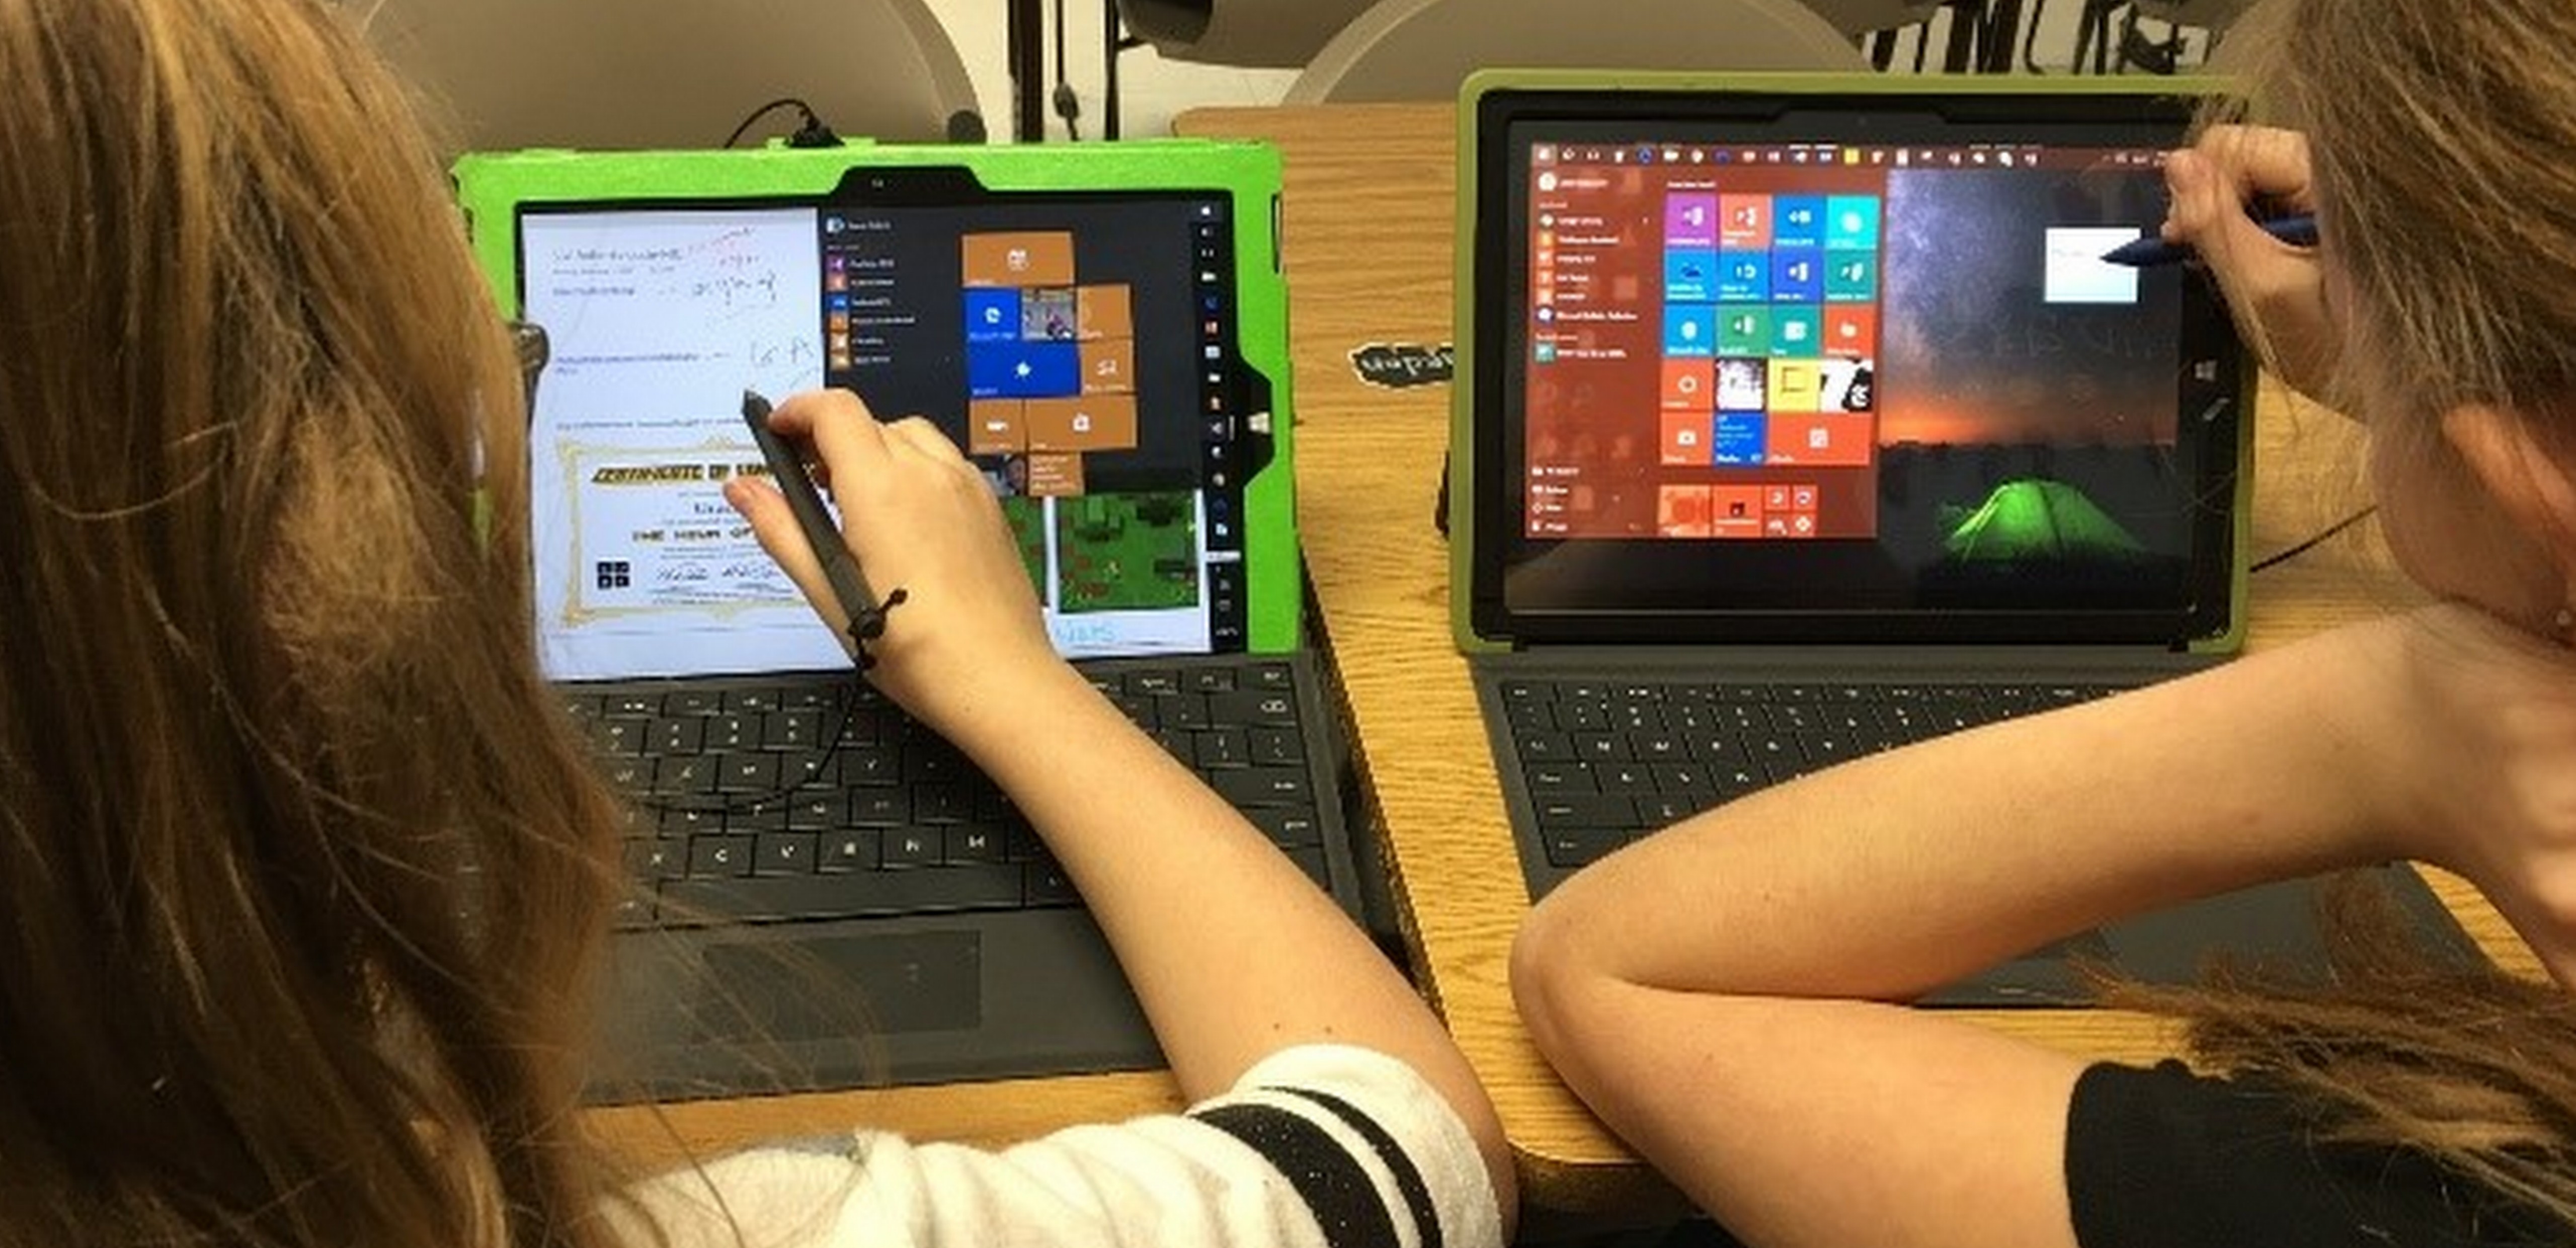 Future Source Reports Windows Shipped Twice as Many K-12 Education Devices as Closest Competitor Last Year